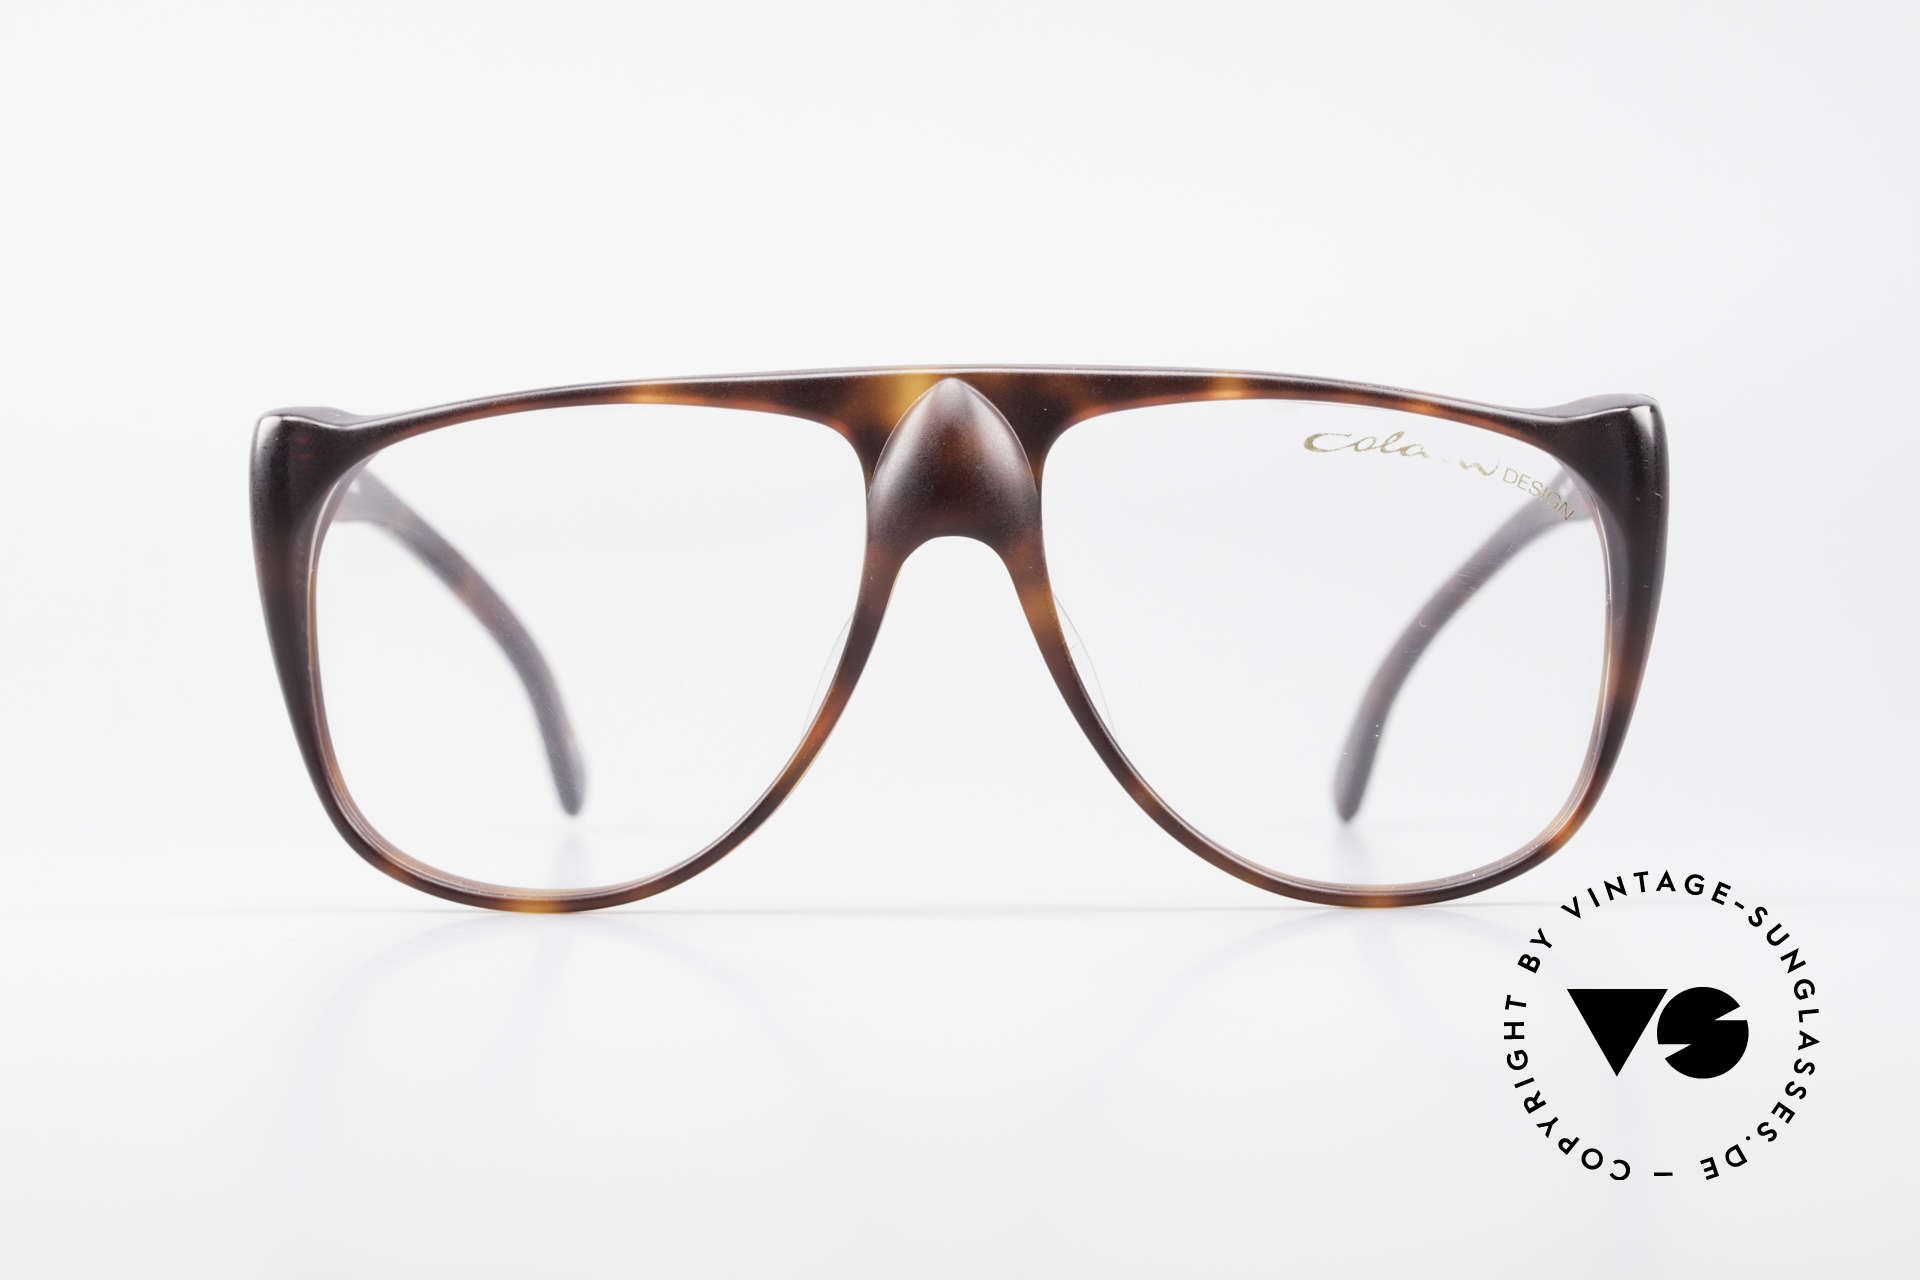 Colani 15-331 Extraordinary Vintage Frame, artistic curved plastic frame in top quality; UNIQUE!, Made for Men